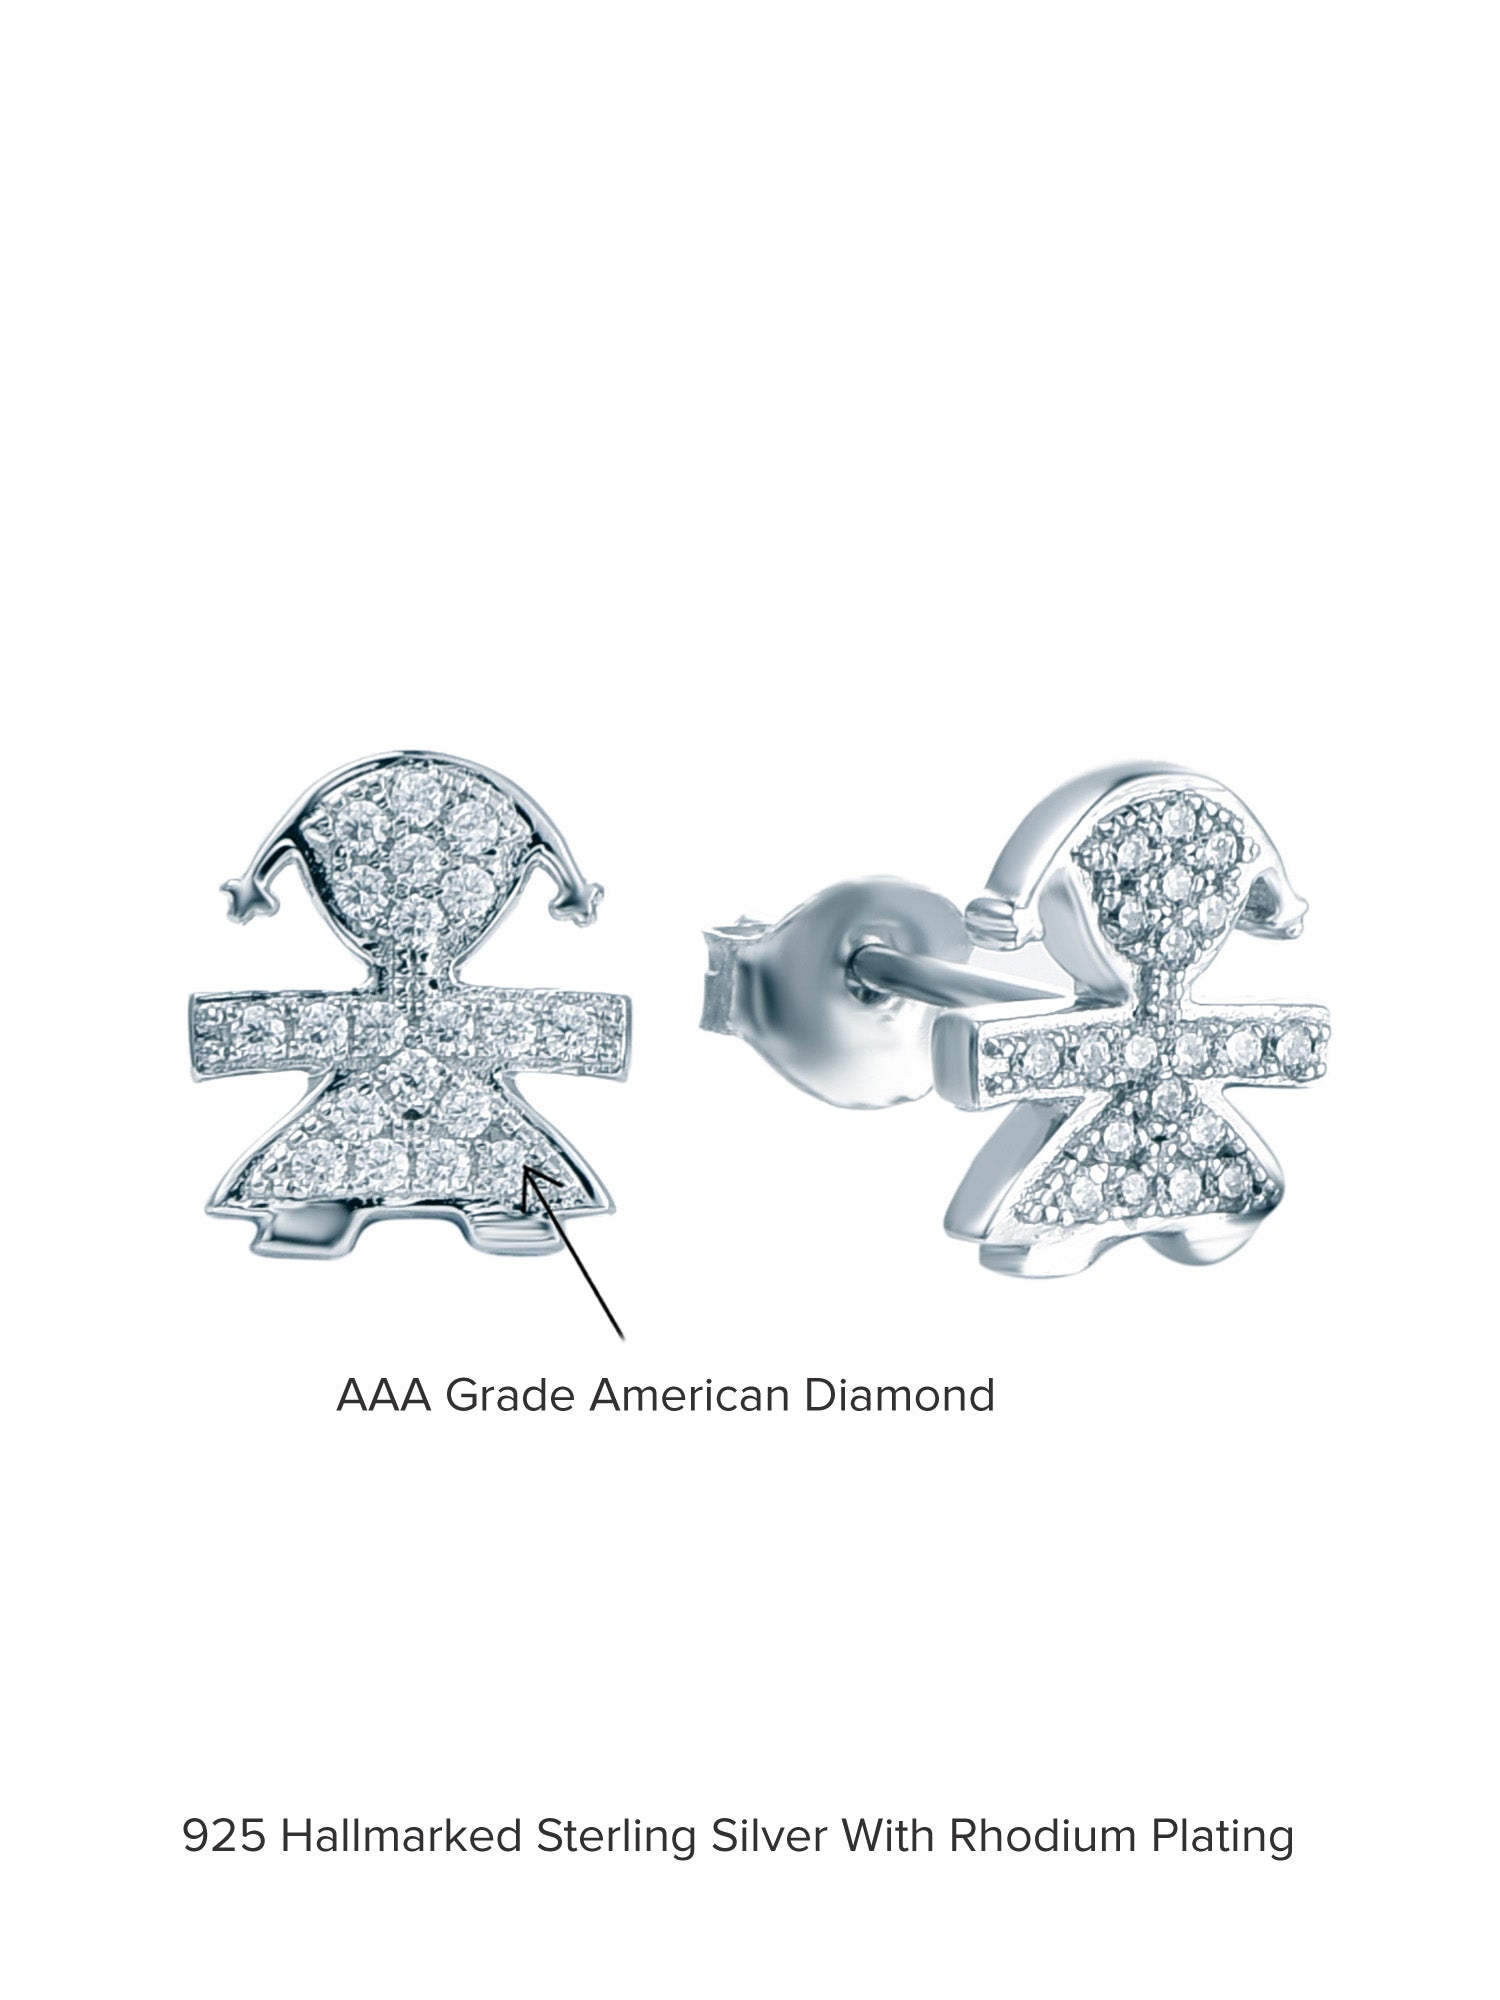 GIRL CHILD SHAPED AMERICAN DIAMONDS 925 SILVER STUDS FOR KIDS-6